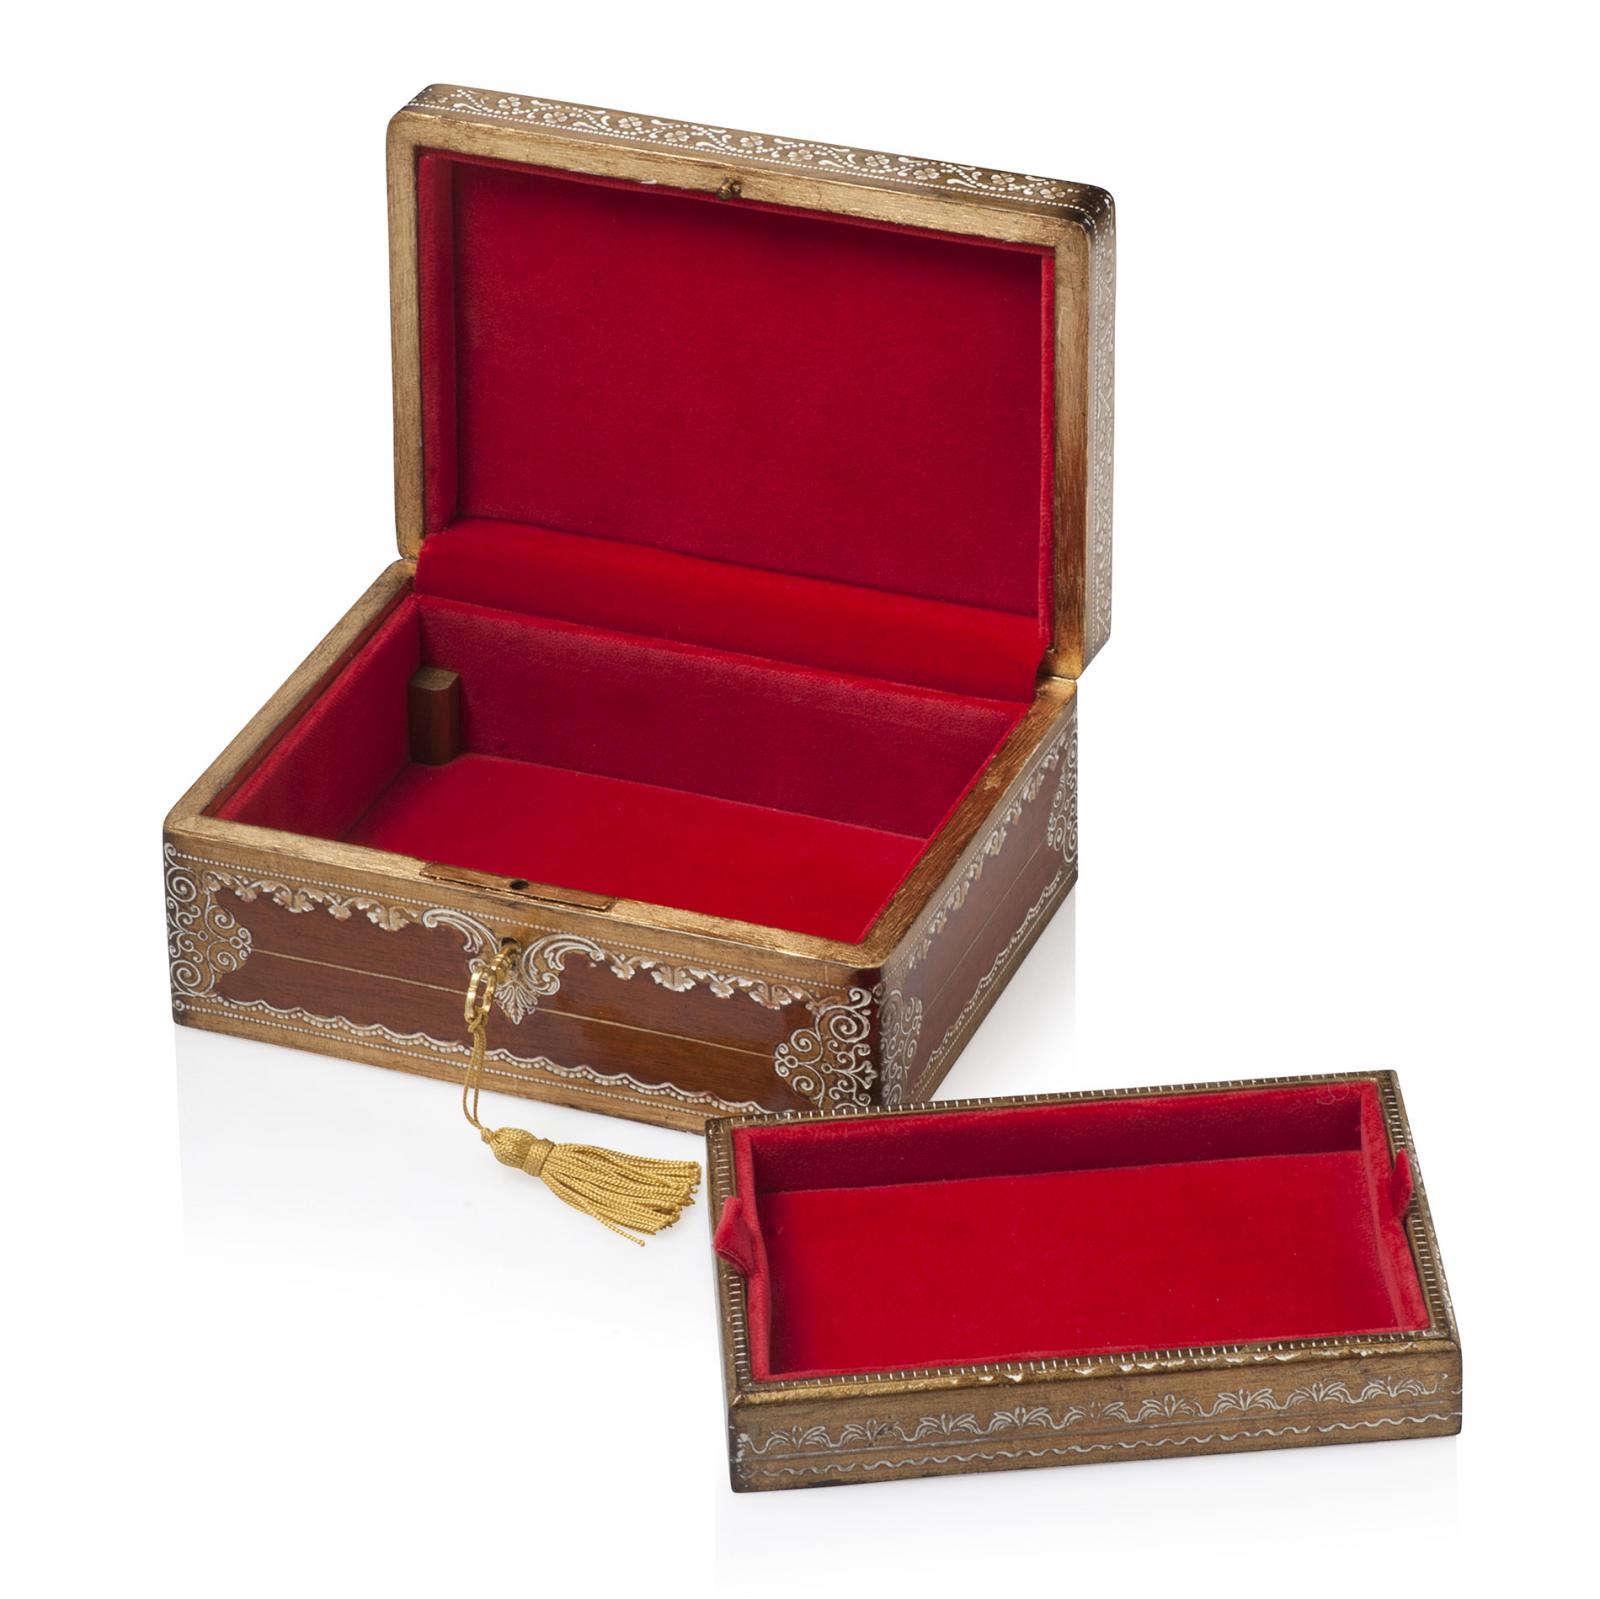 Jewellery box red and gold pattern velvet lined